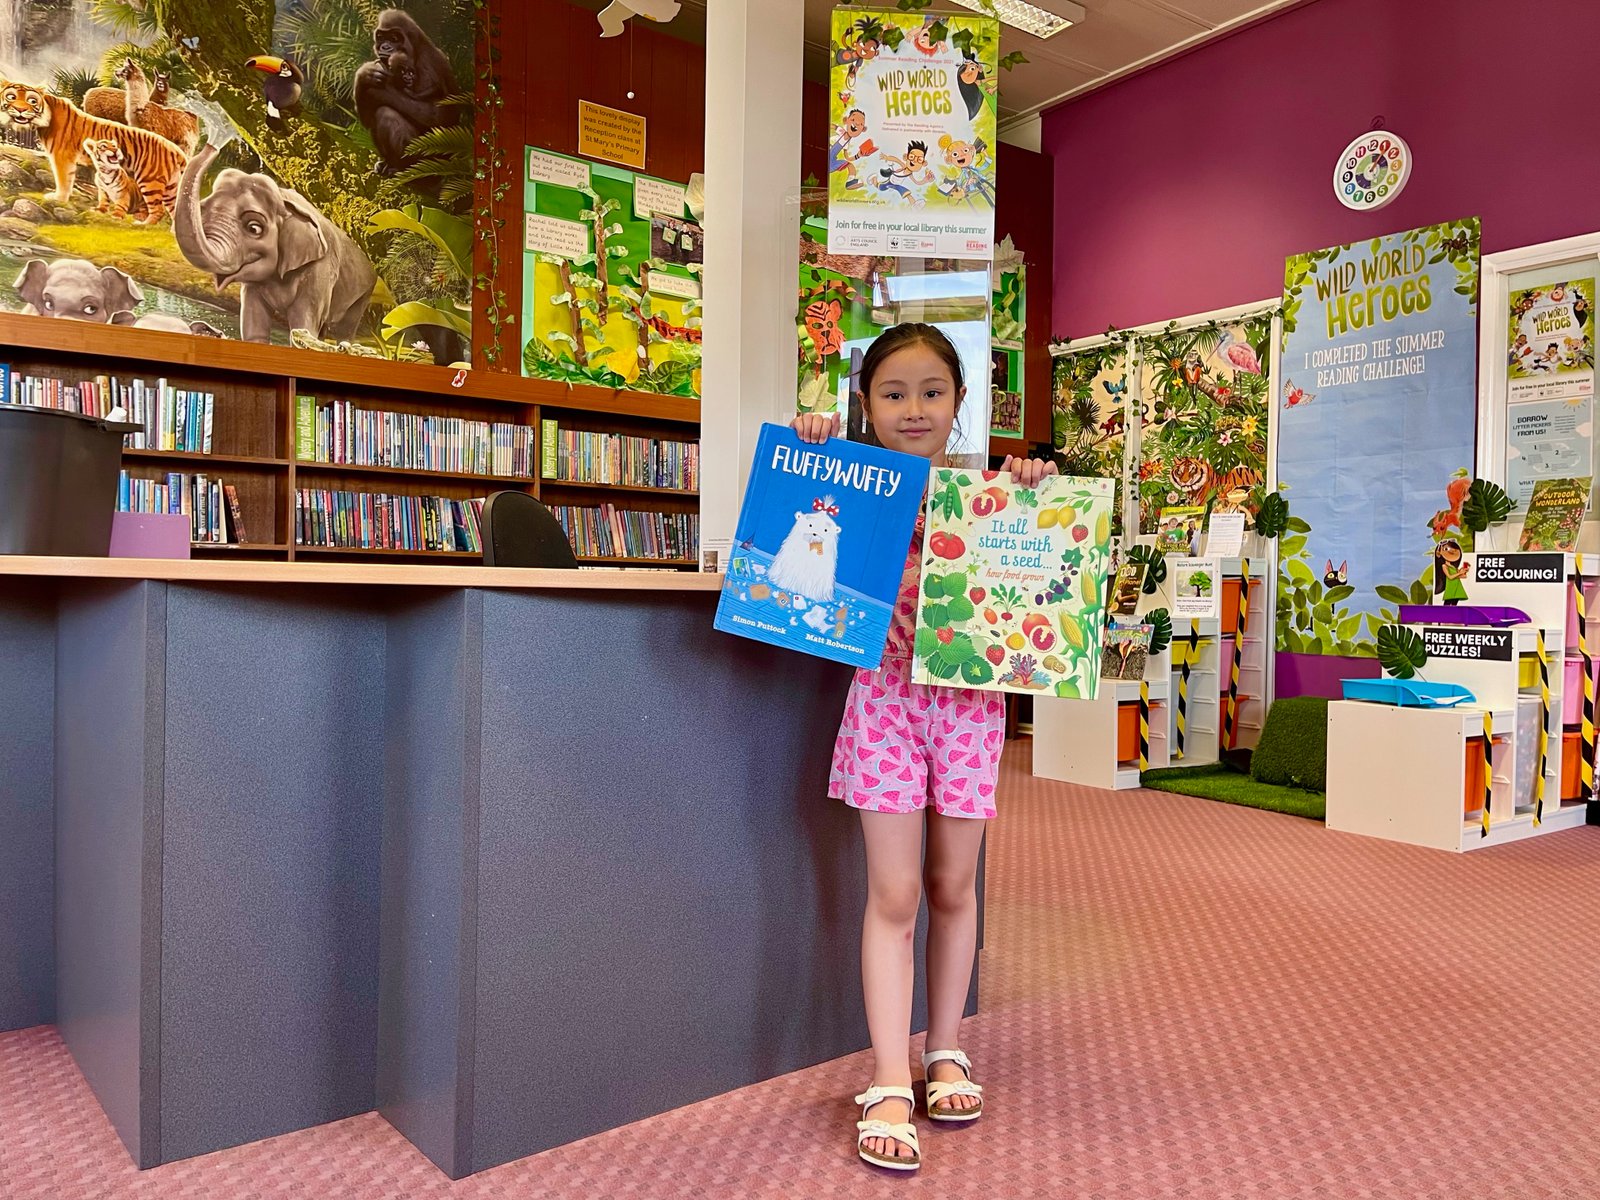 Lei Hang's daughter Yasmin picked 2 books in Ryde Children's Library on the Isle of Wight for the Summer Reading Challenge 2021 Wild World Heroes.